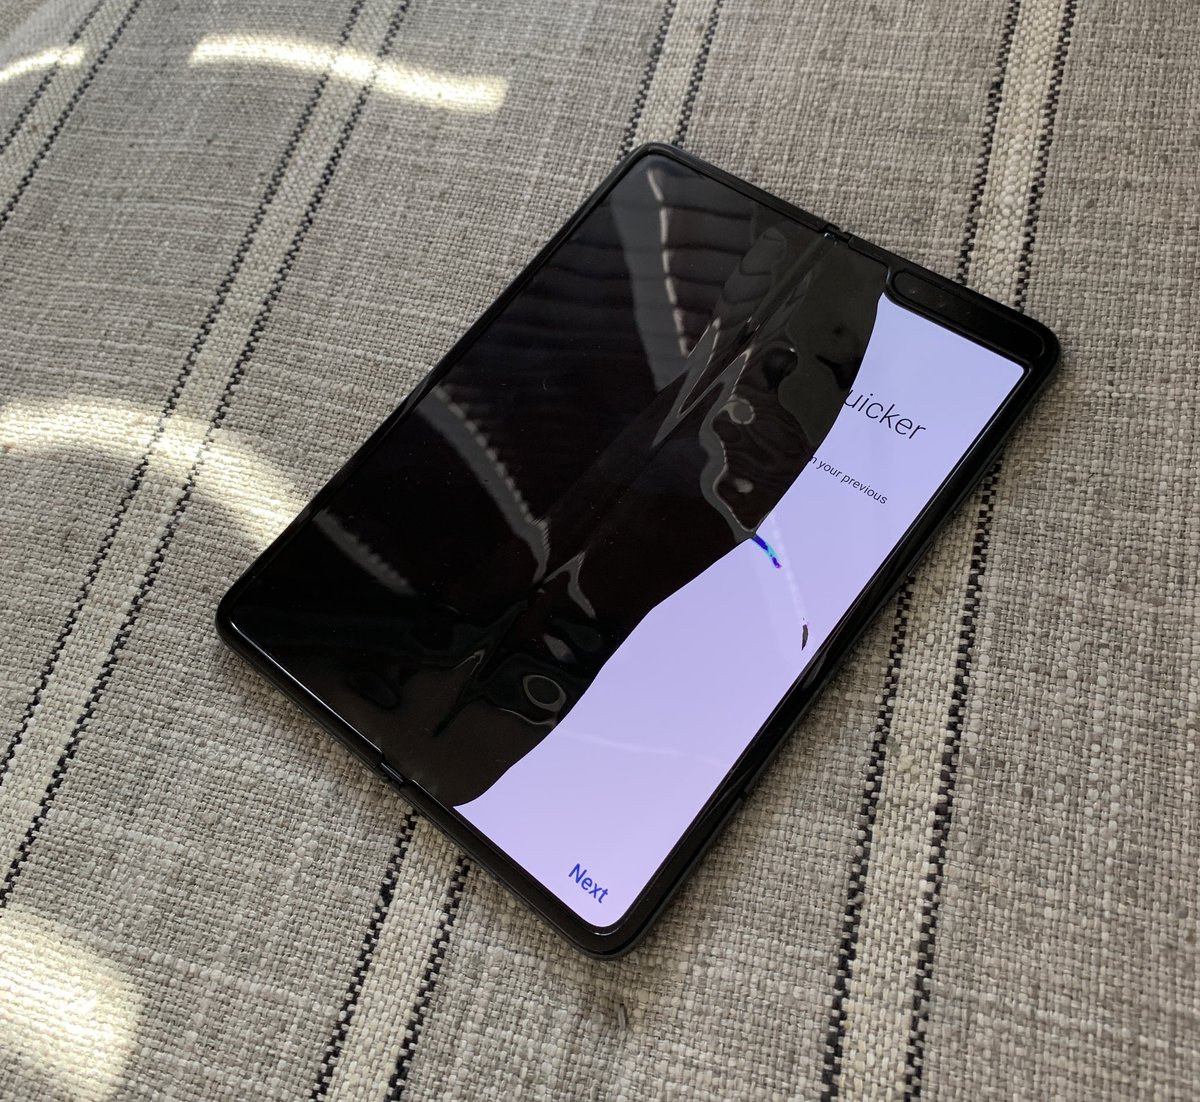 Samsung Galaxy Fold Display Breaks for Multiple Reviewers After Just Days of Use